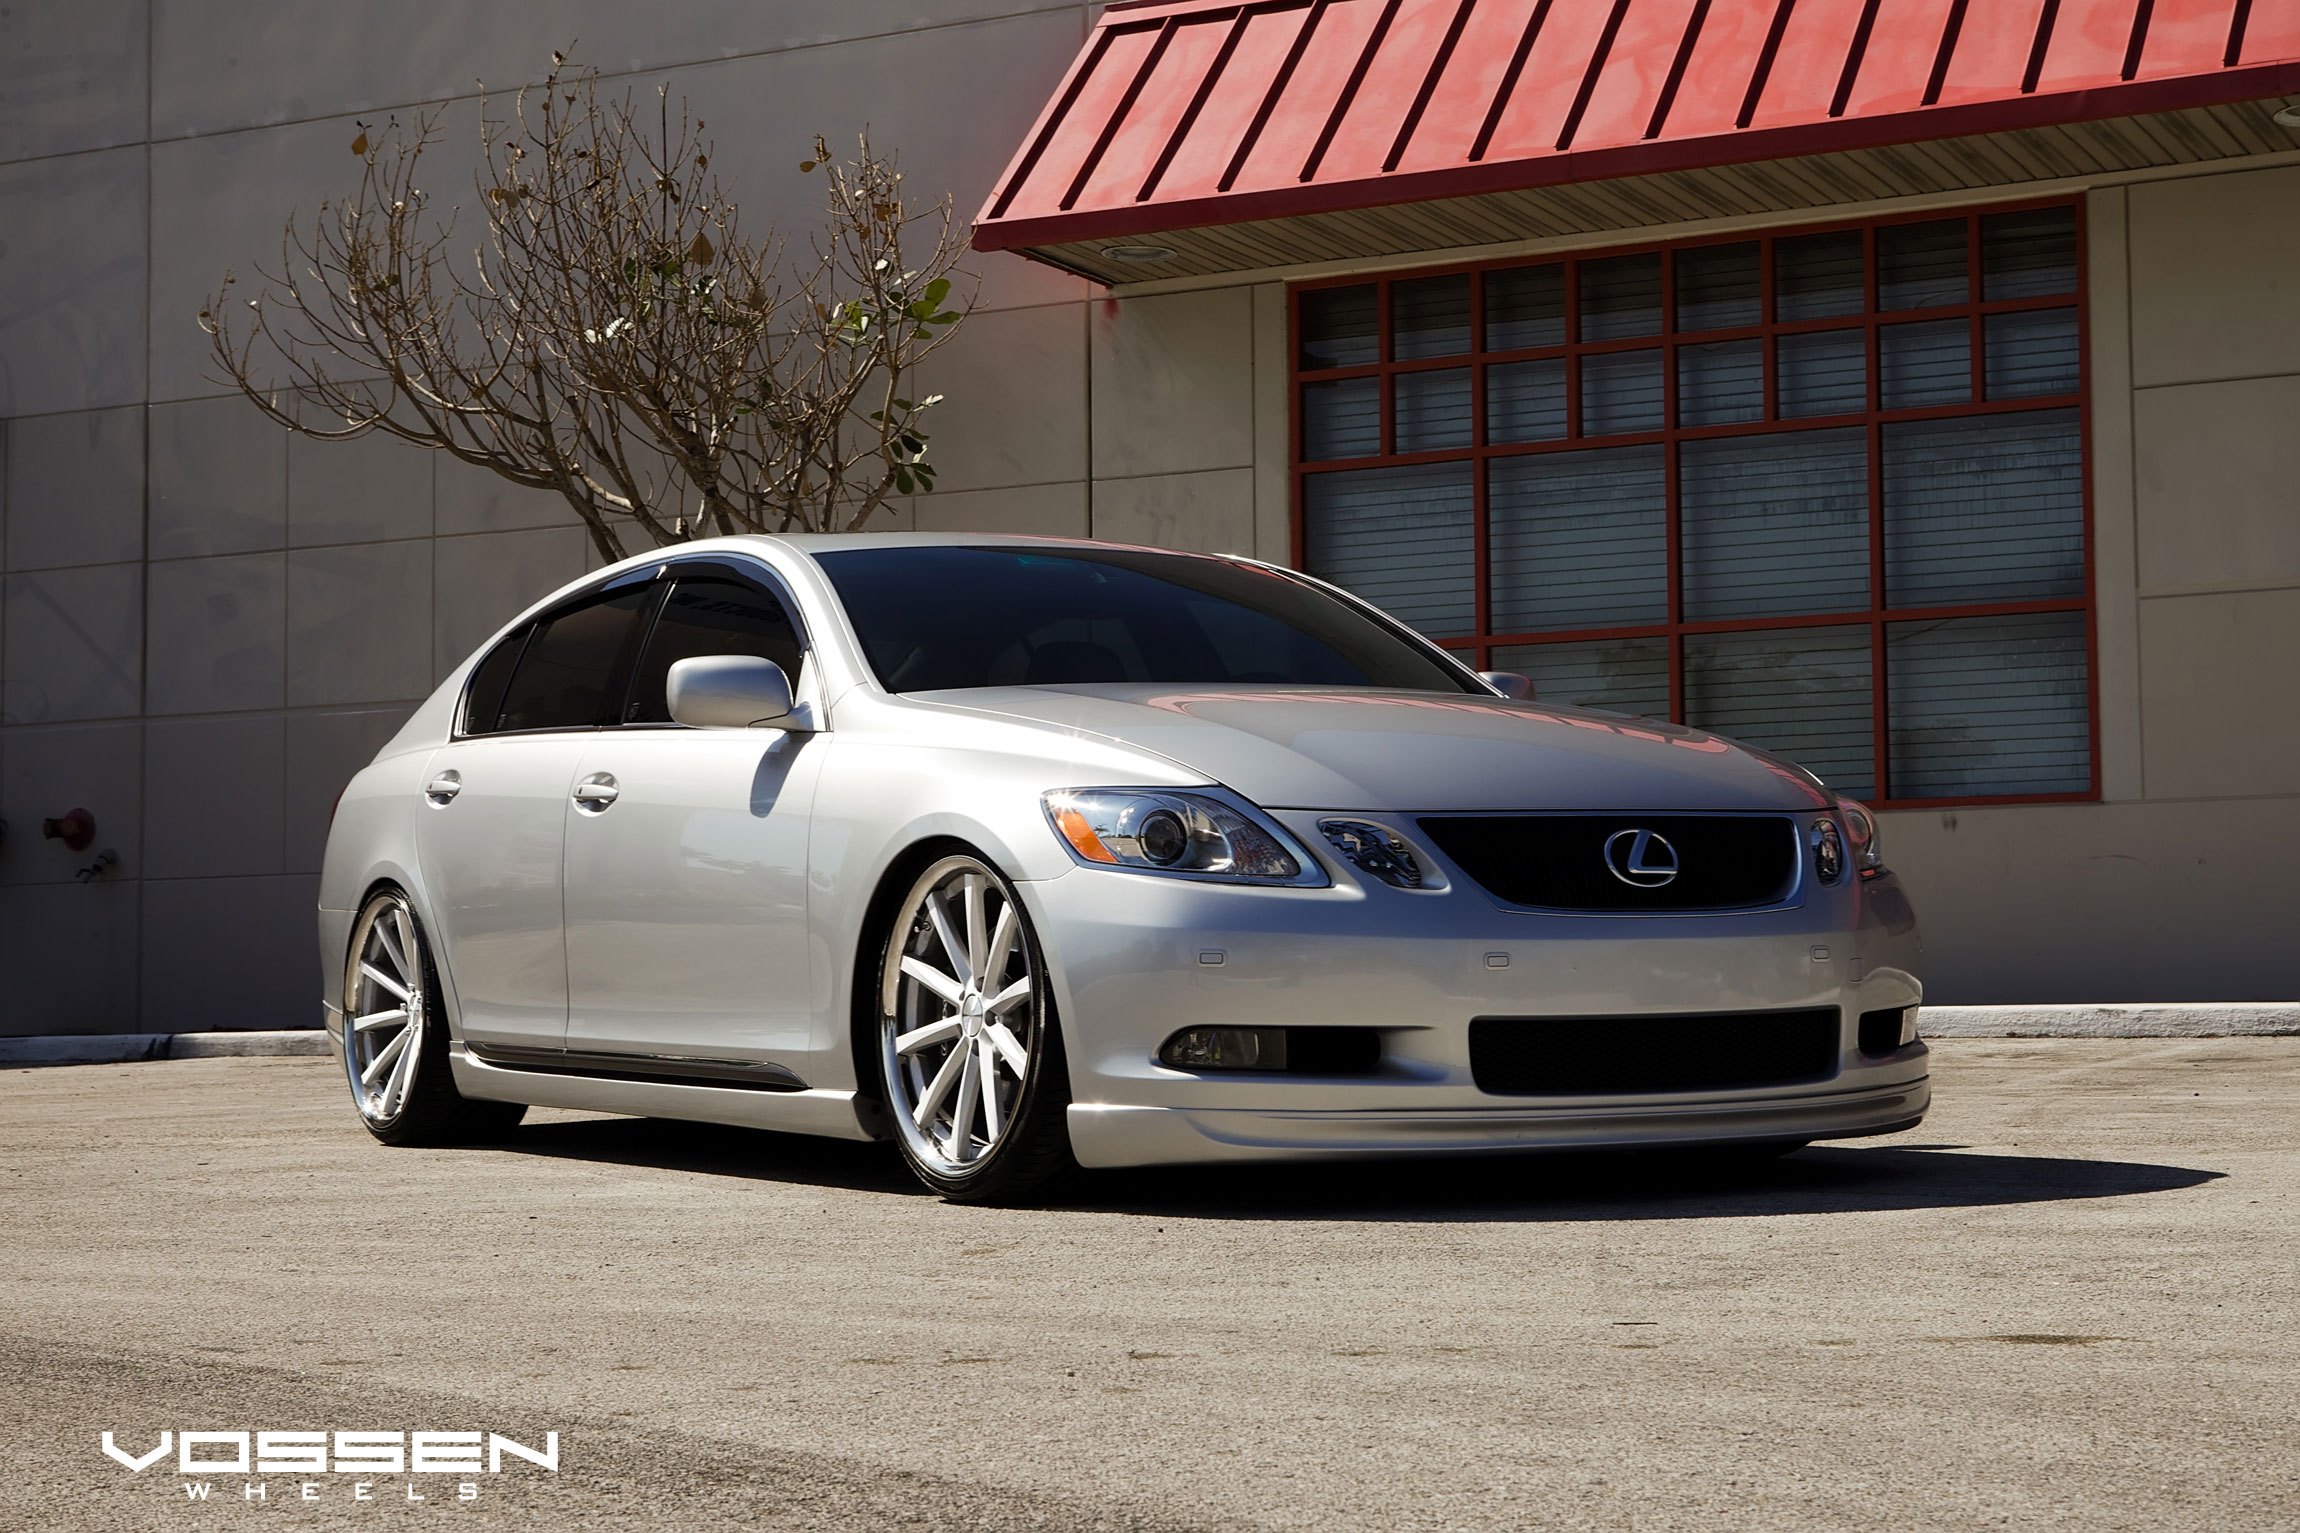 VIP Look of Lexus GS That Boasts Lowered Suspension and